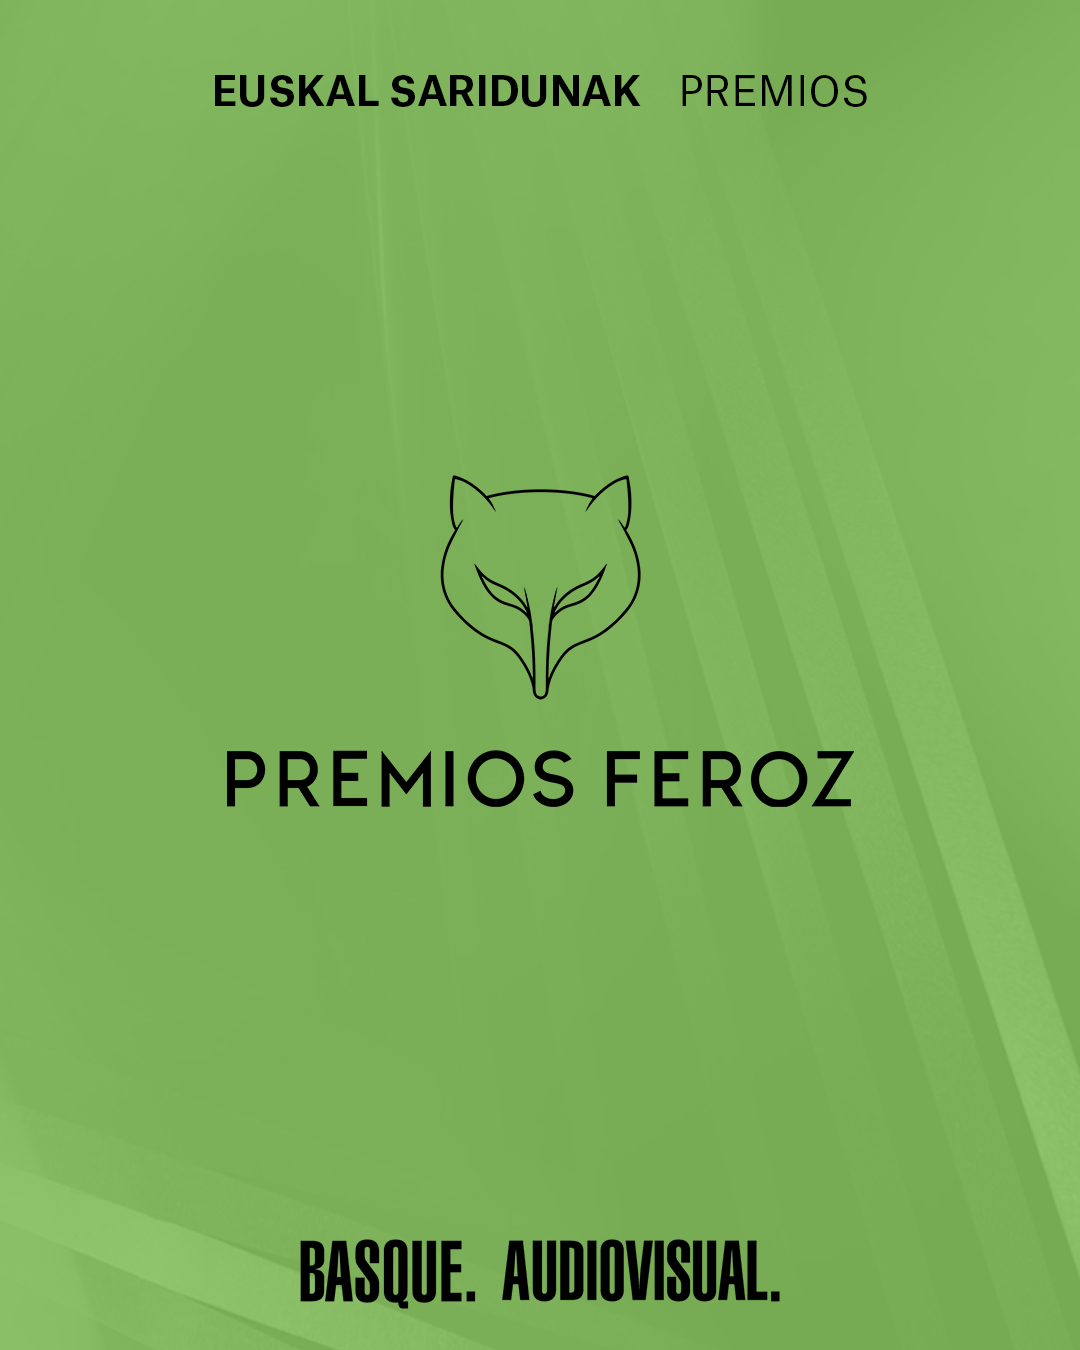 ‘20,000 Species of Bees’, ‘Upon Entry’ and ‘Foremost By Night, awarded Basque productions at the Feroz Awards